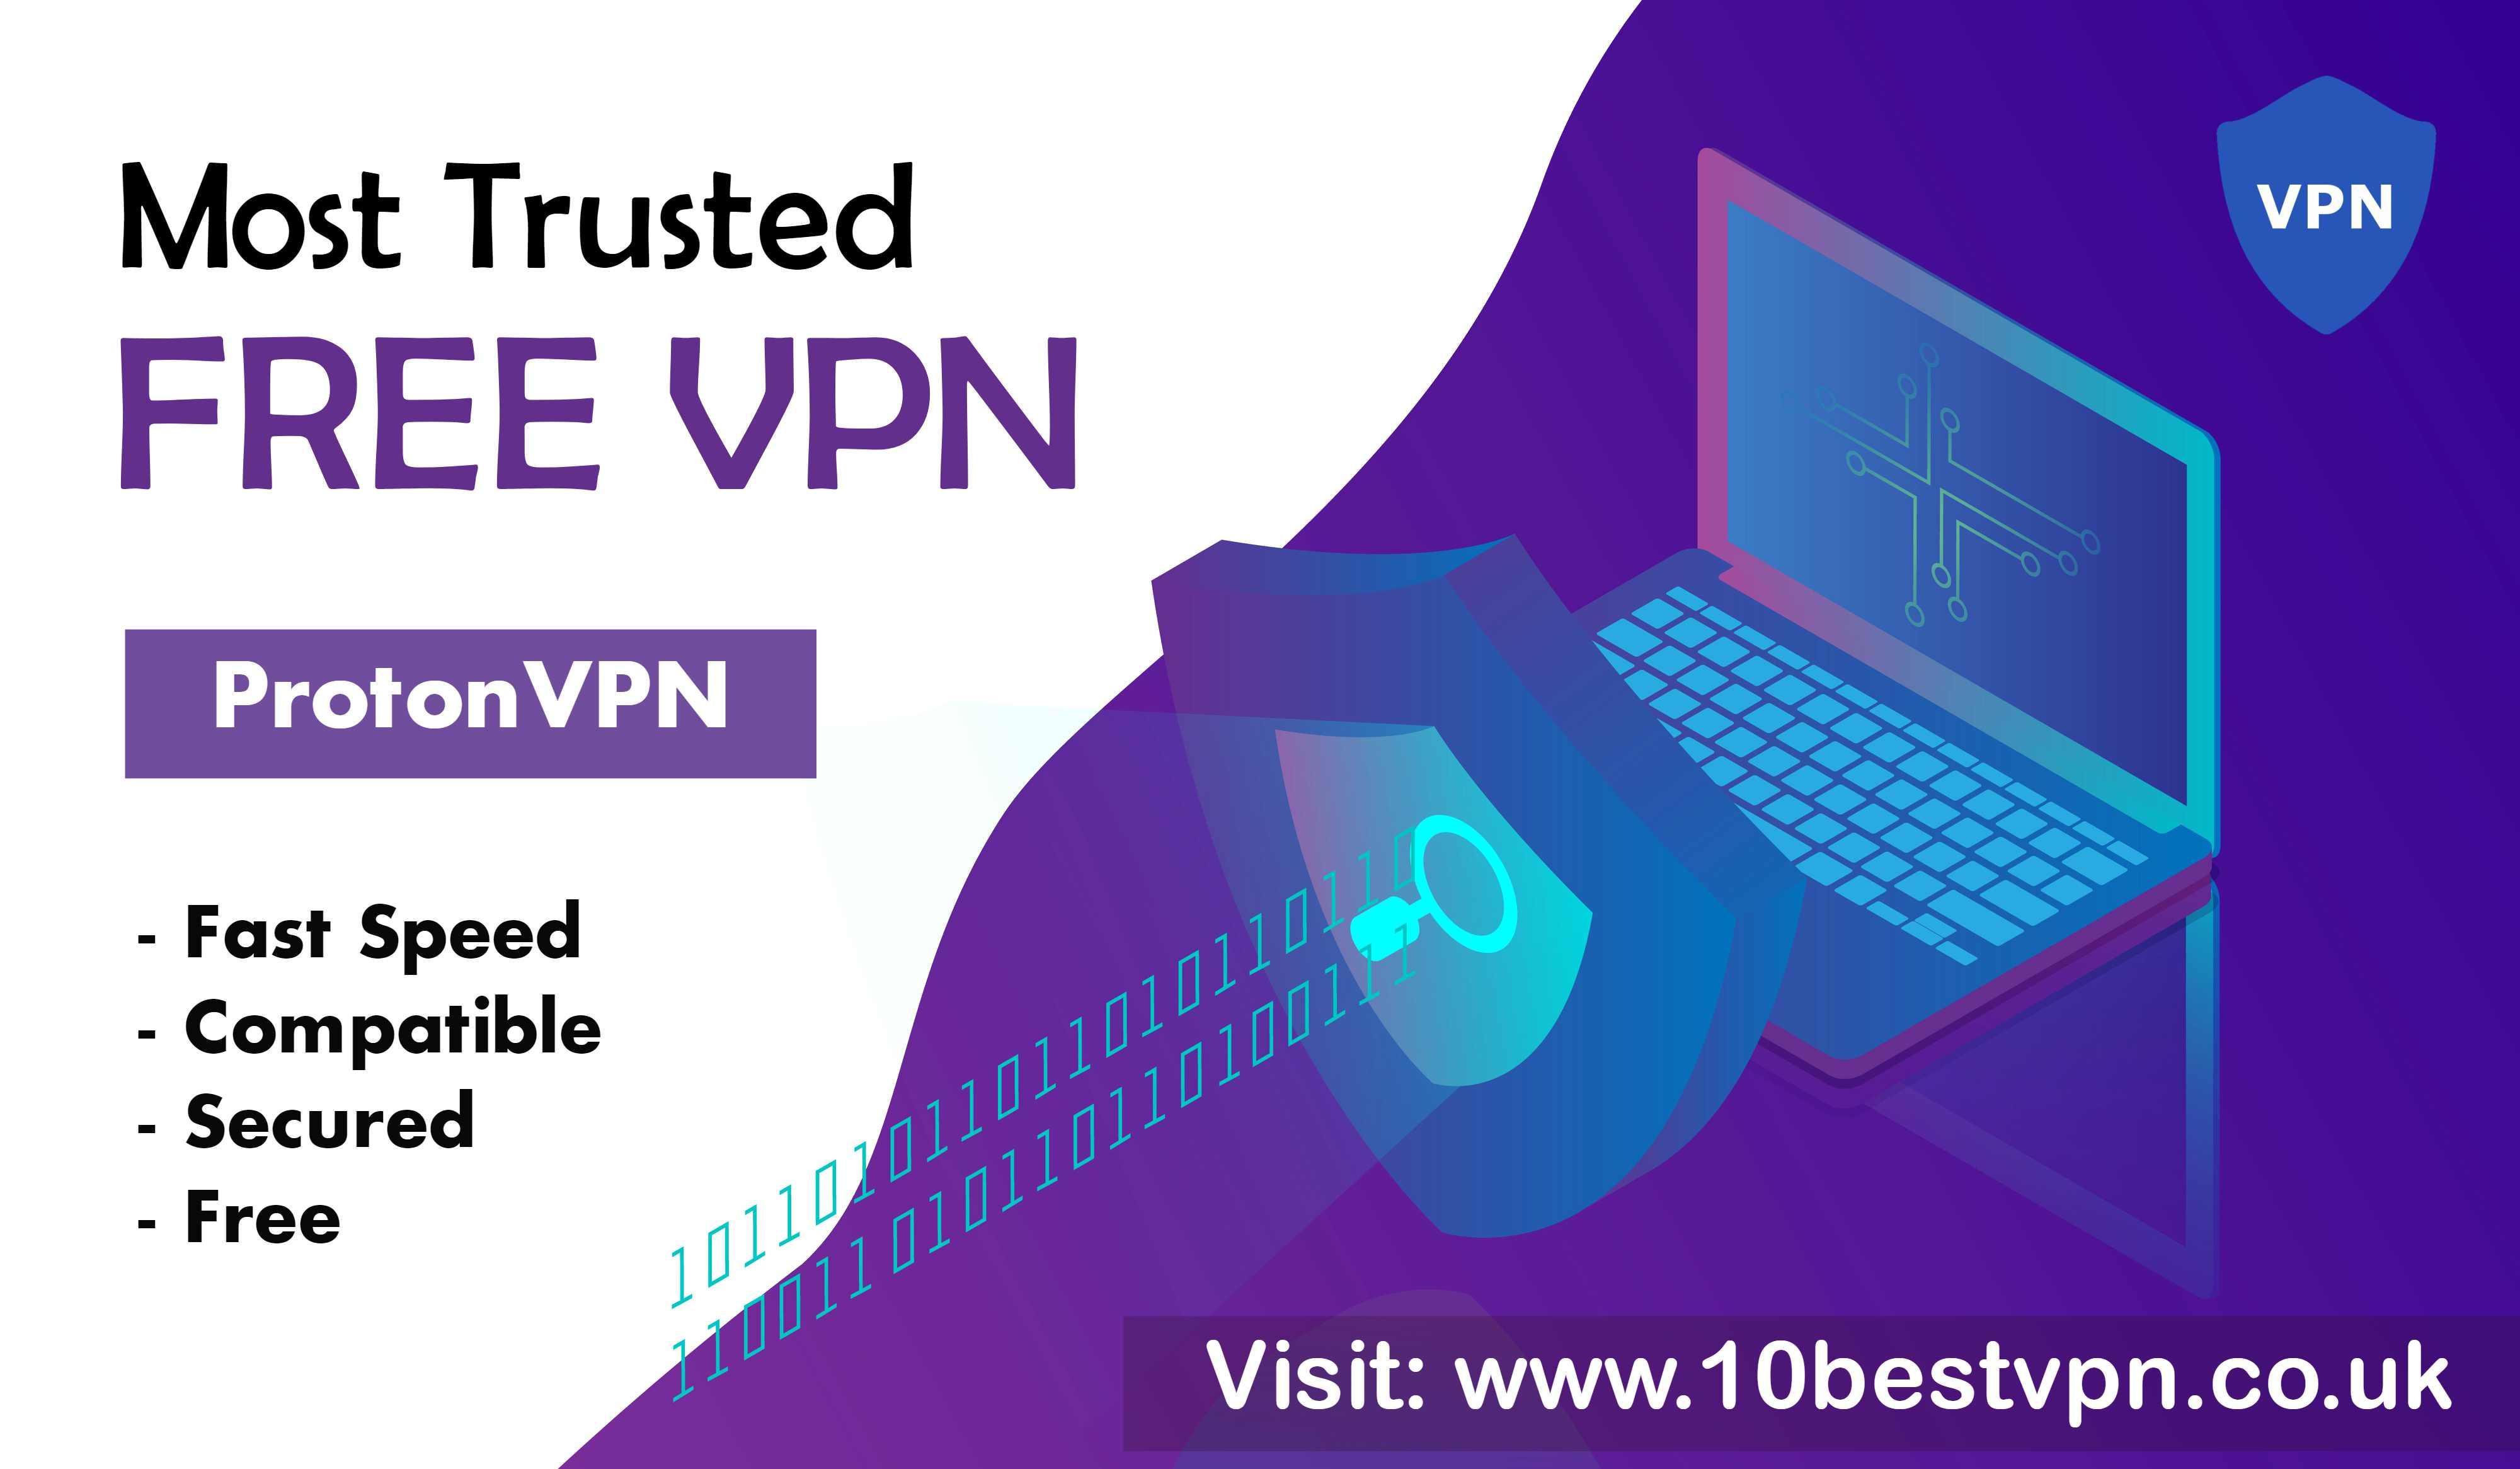 Image - Looking for #BestFreeVPN for your device? ProtonVPN is the best choice in the same category. #ProtonVPN is fr...